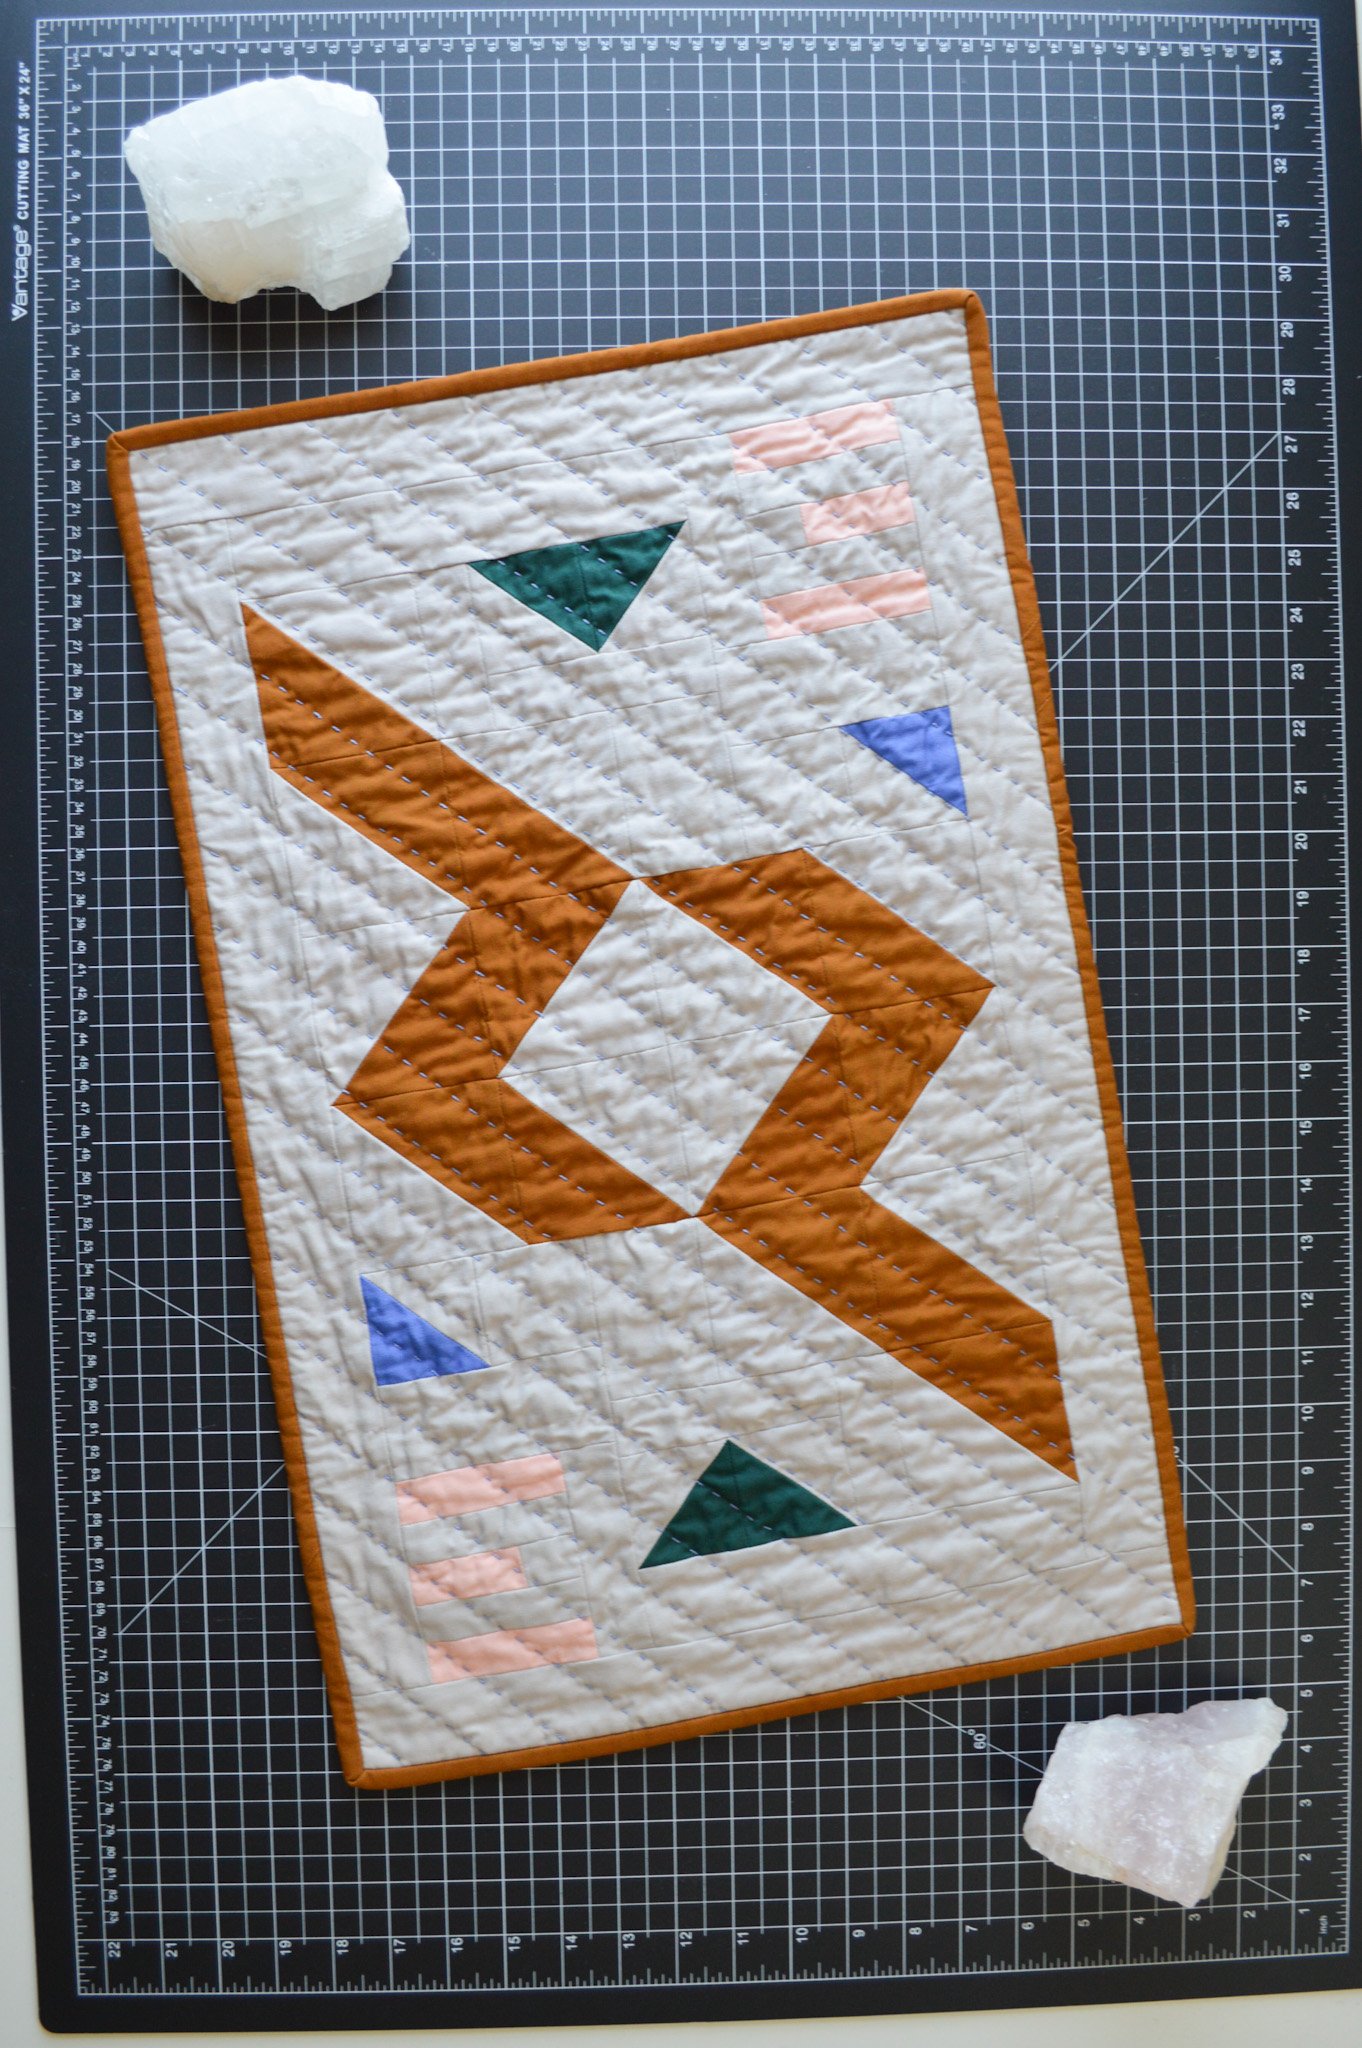  a hand quilting modern mini quilt and some crystals on a black cutting mat 